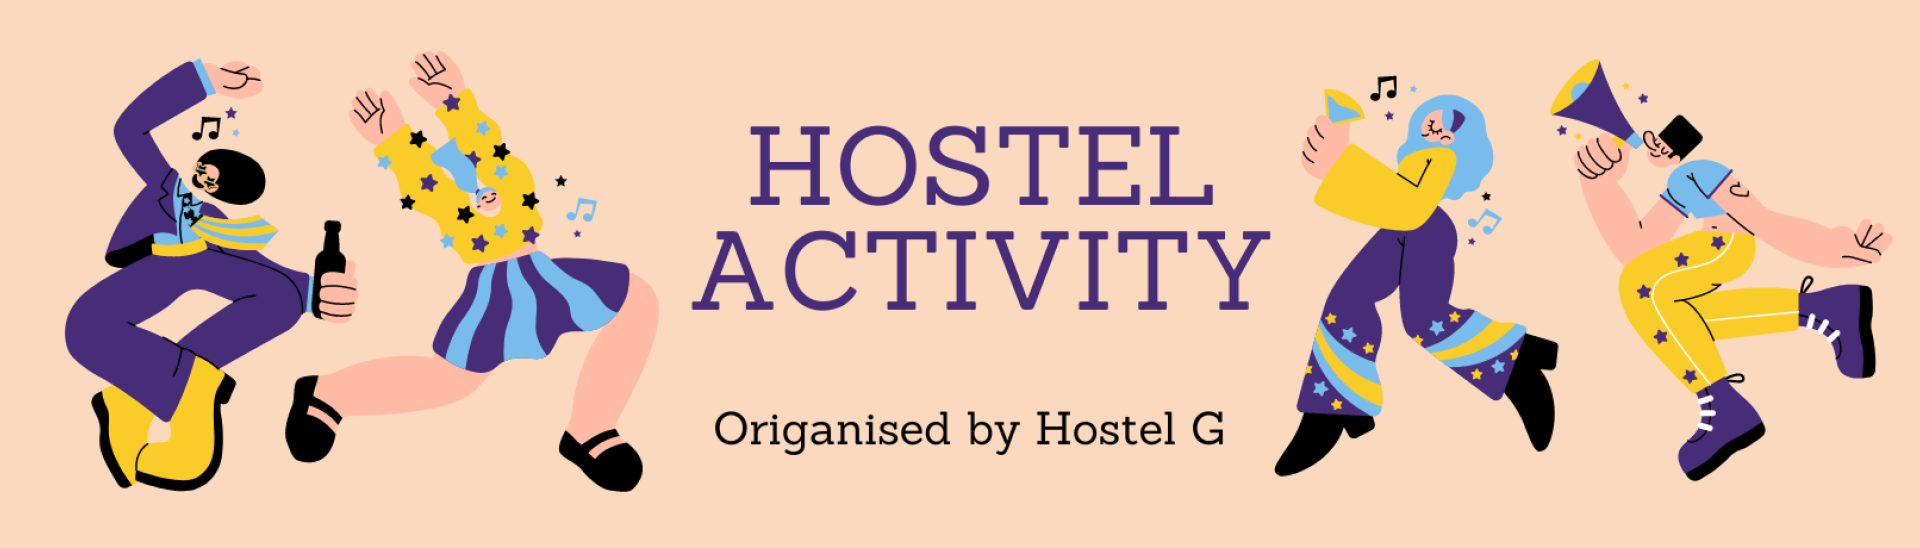 Welcome to Join the Hostel Activity